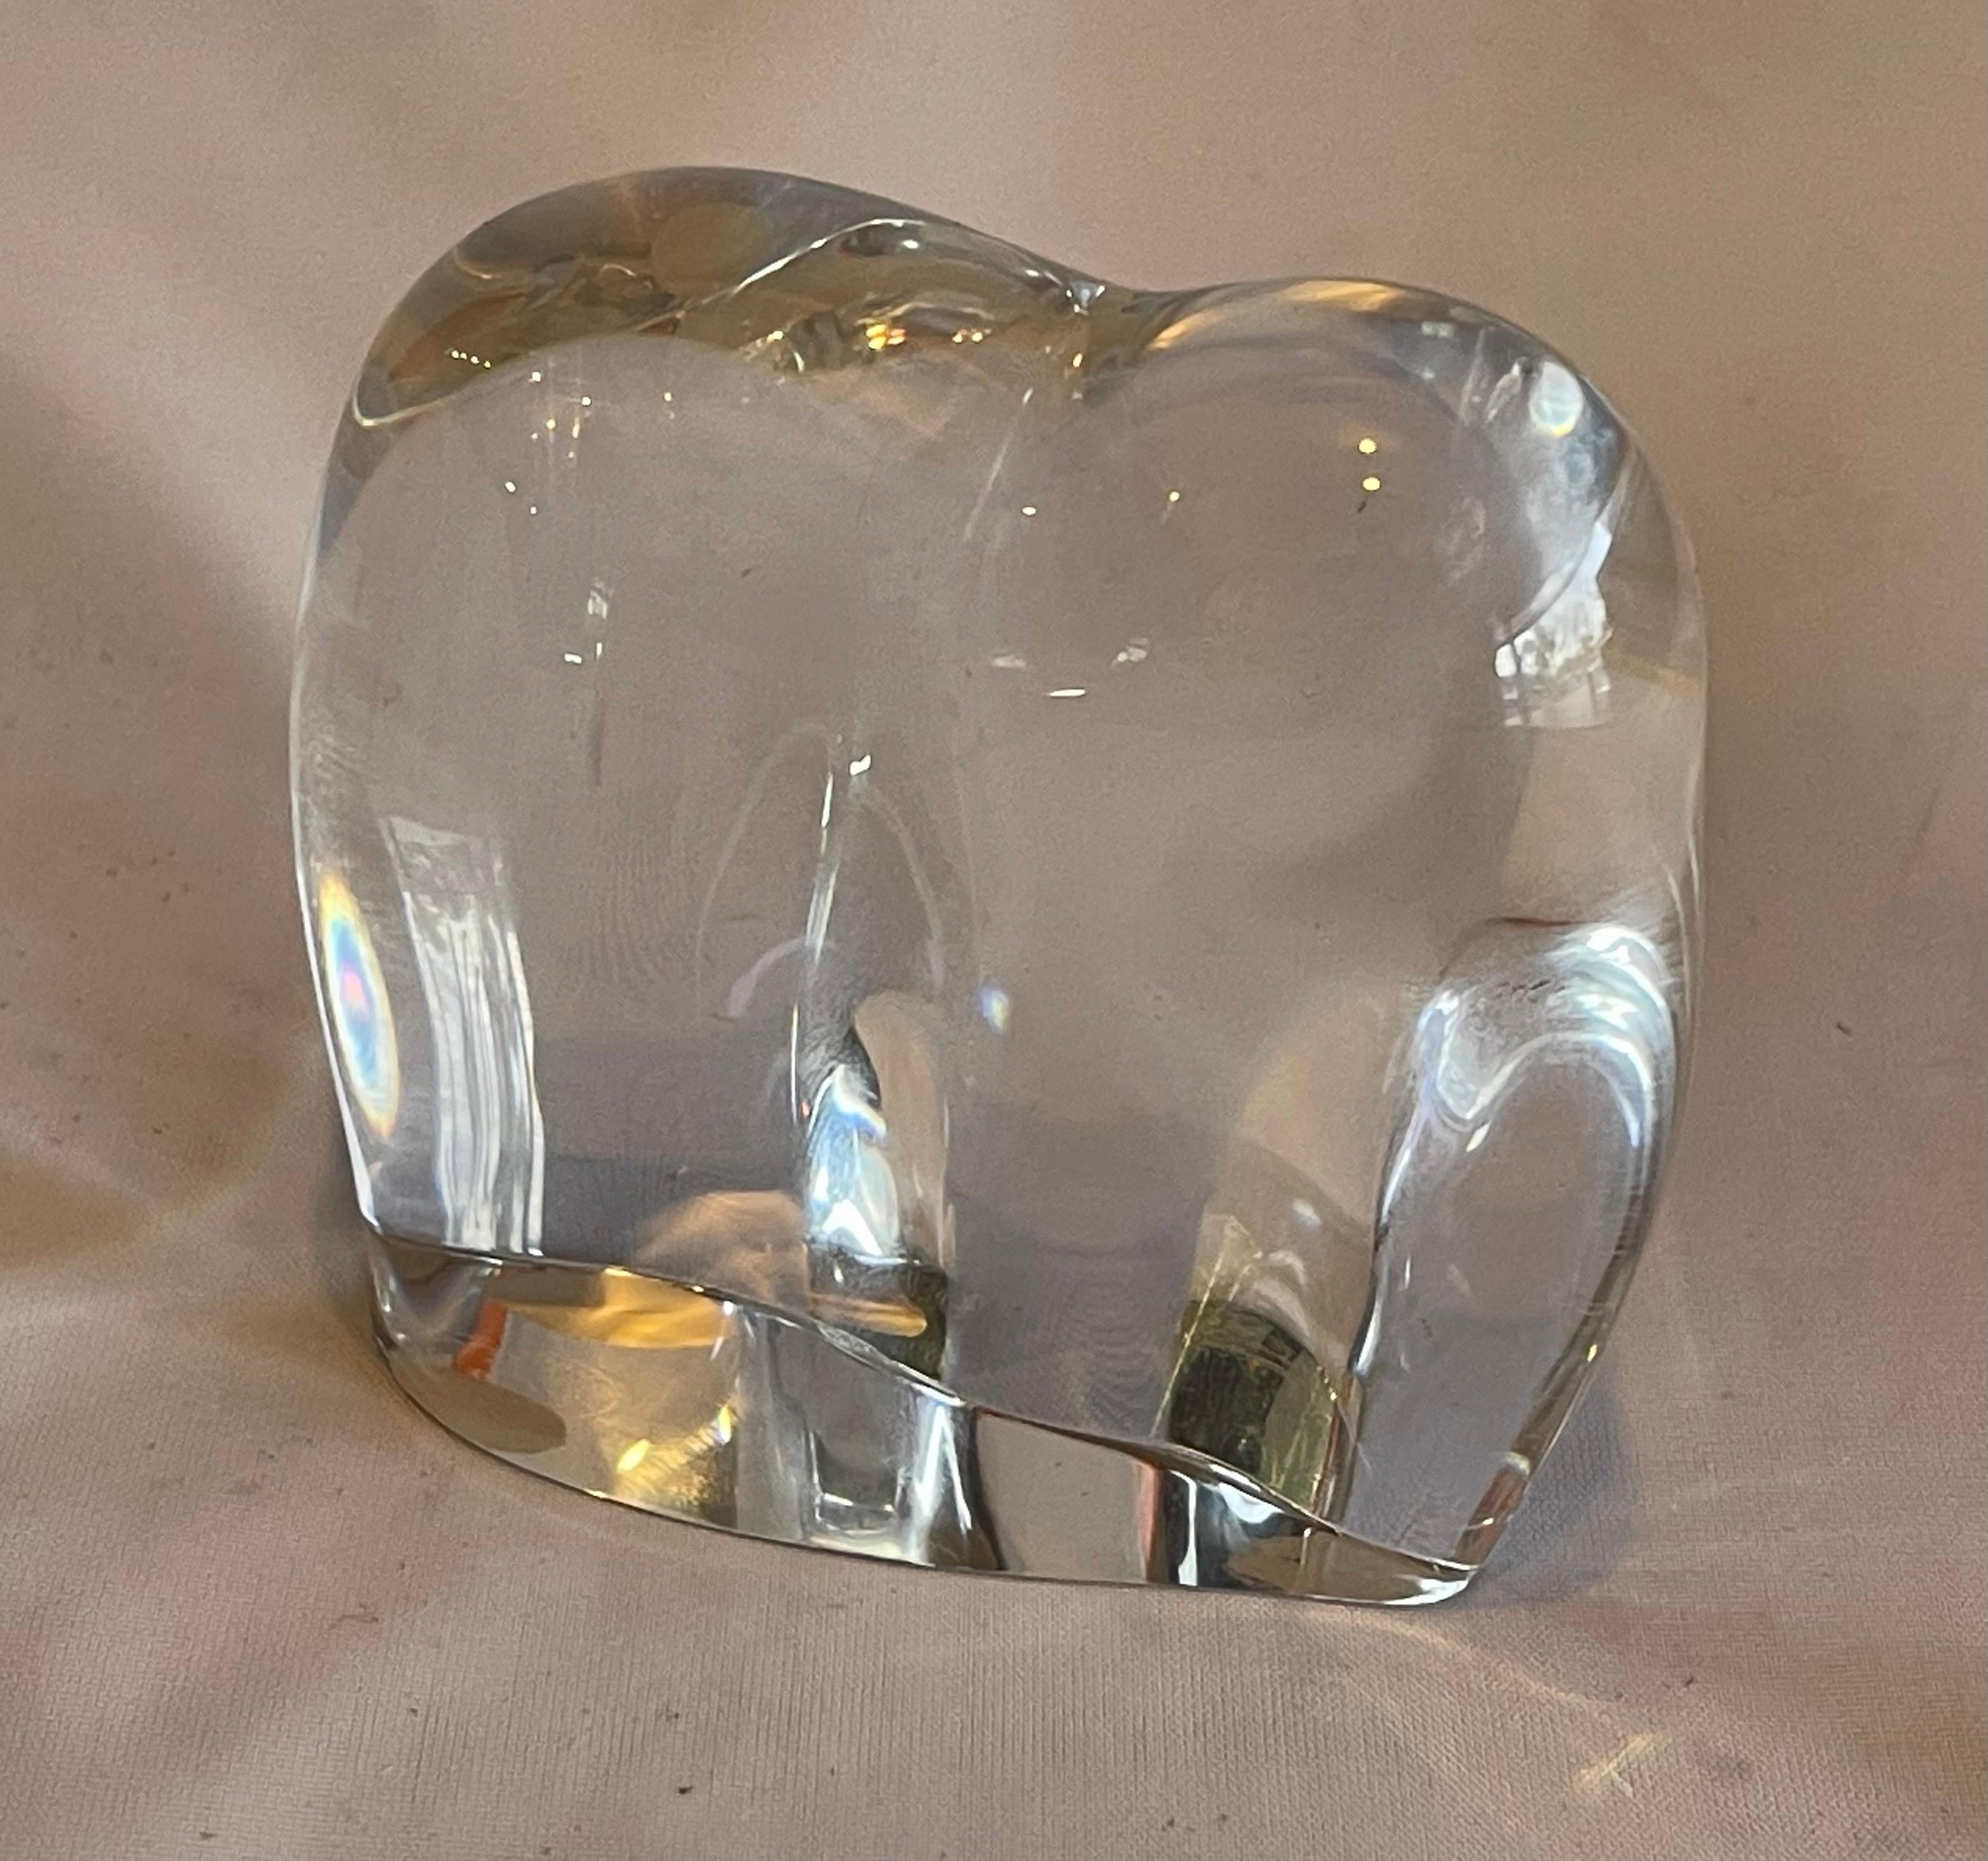 Gorgeous stylized crystal elephant sculpture by Baccarat, circa 1990s. The piece is in excellent condition with no visible imperfections and has great clarity. Signed on the underside, the piece measures 2.625